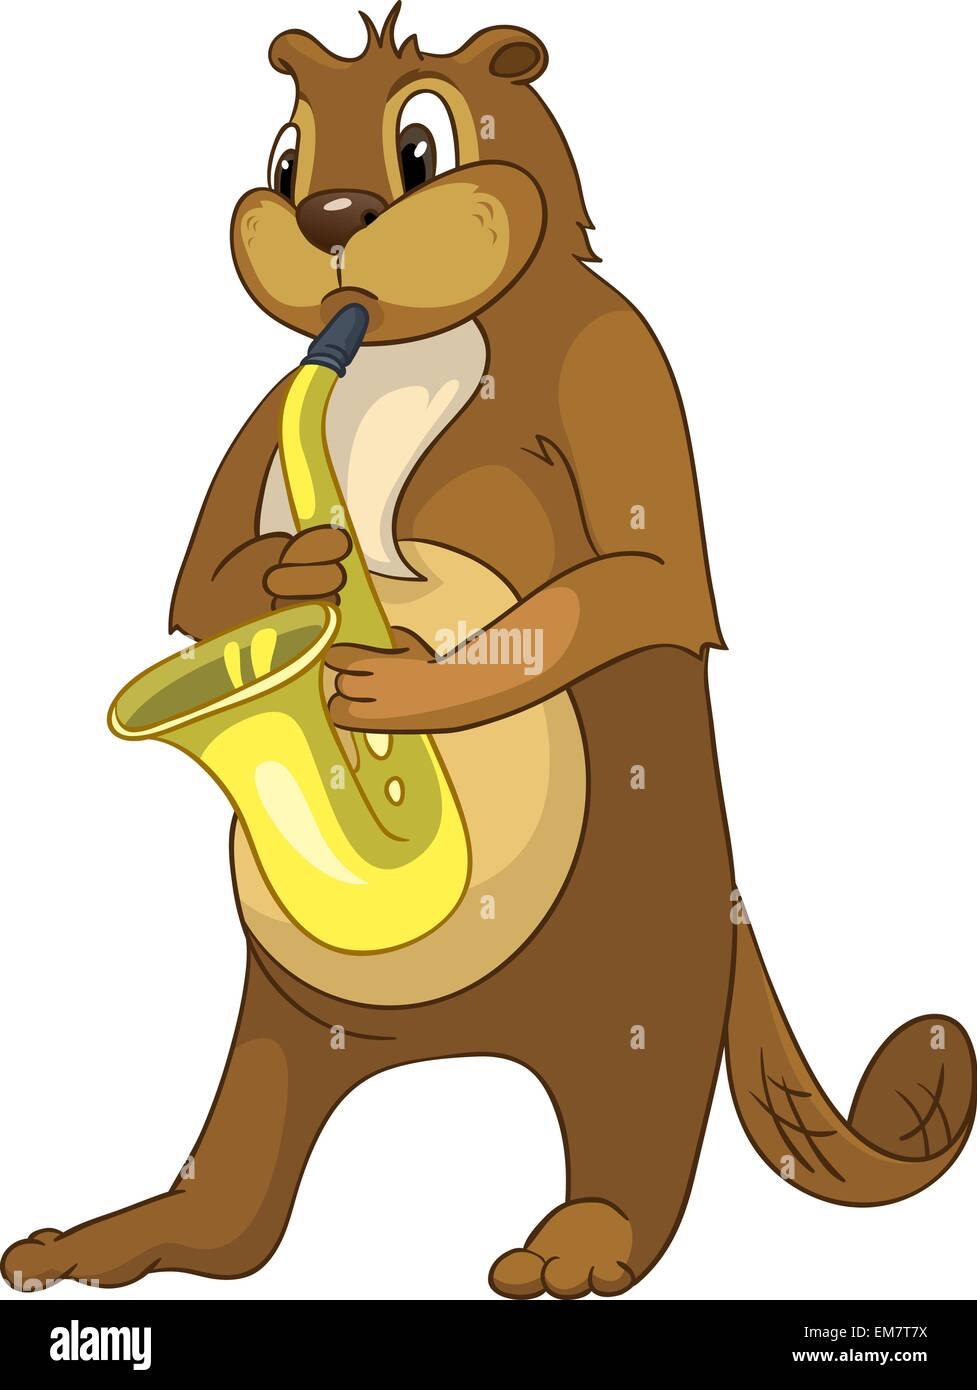 Beaver CREES. Look for Funny Beaver by Keyword 'CREES' Stock Vector